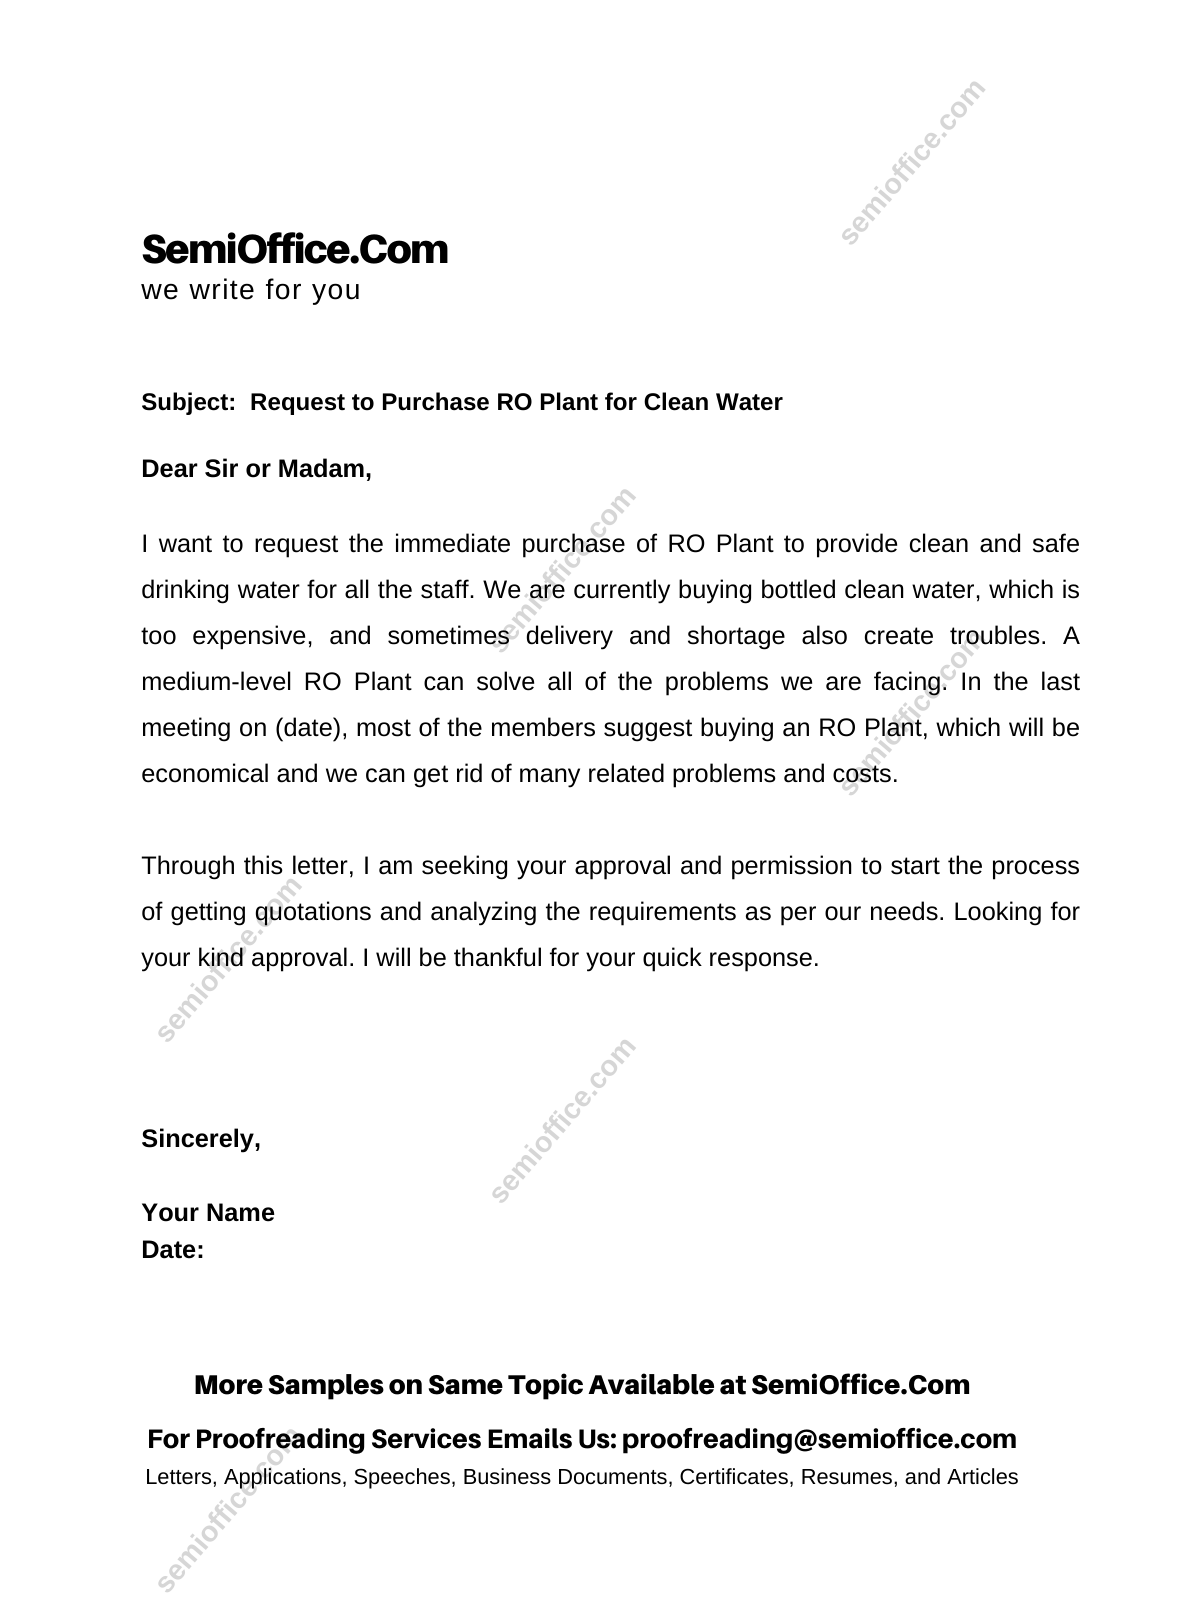 request-letter-to-purchase-ro-plant-to-provide-safe-drinking-water-to